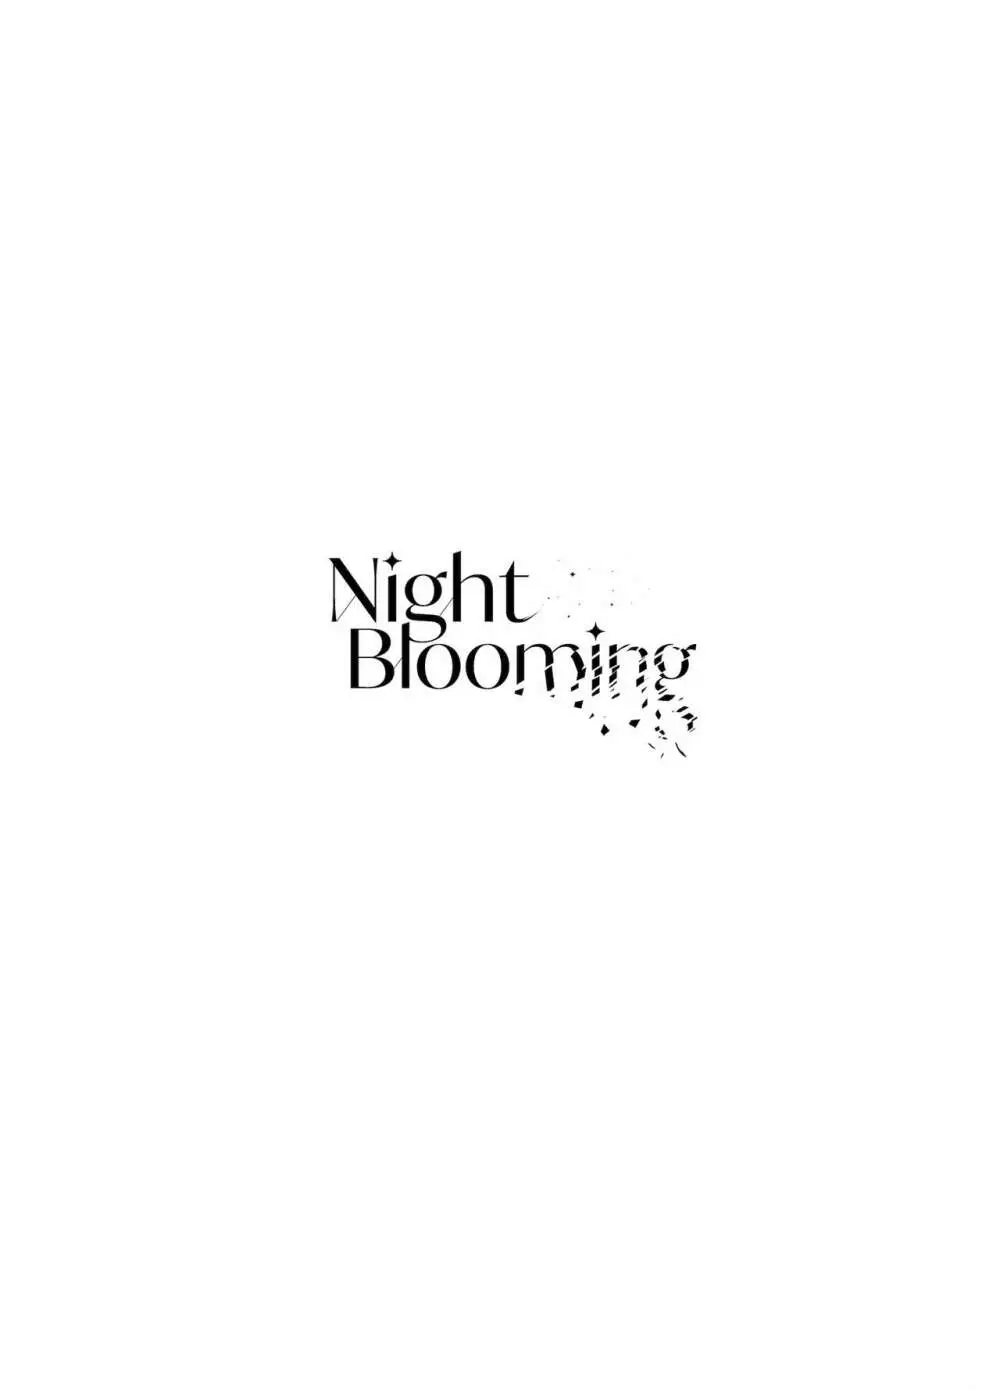 Night Blooming - page2